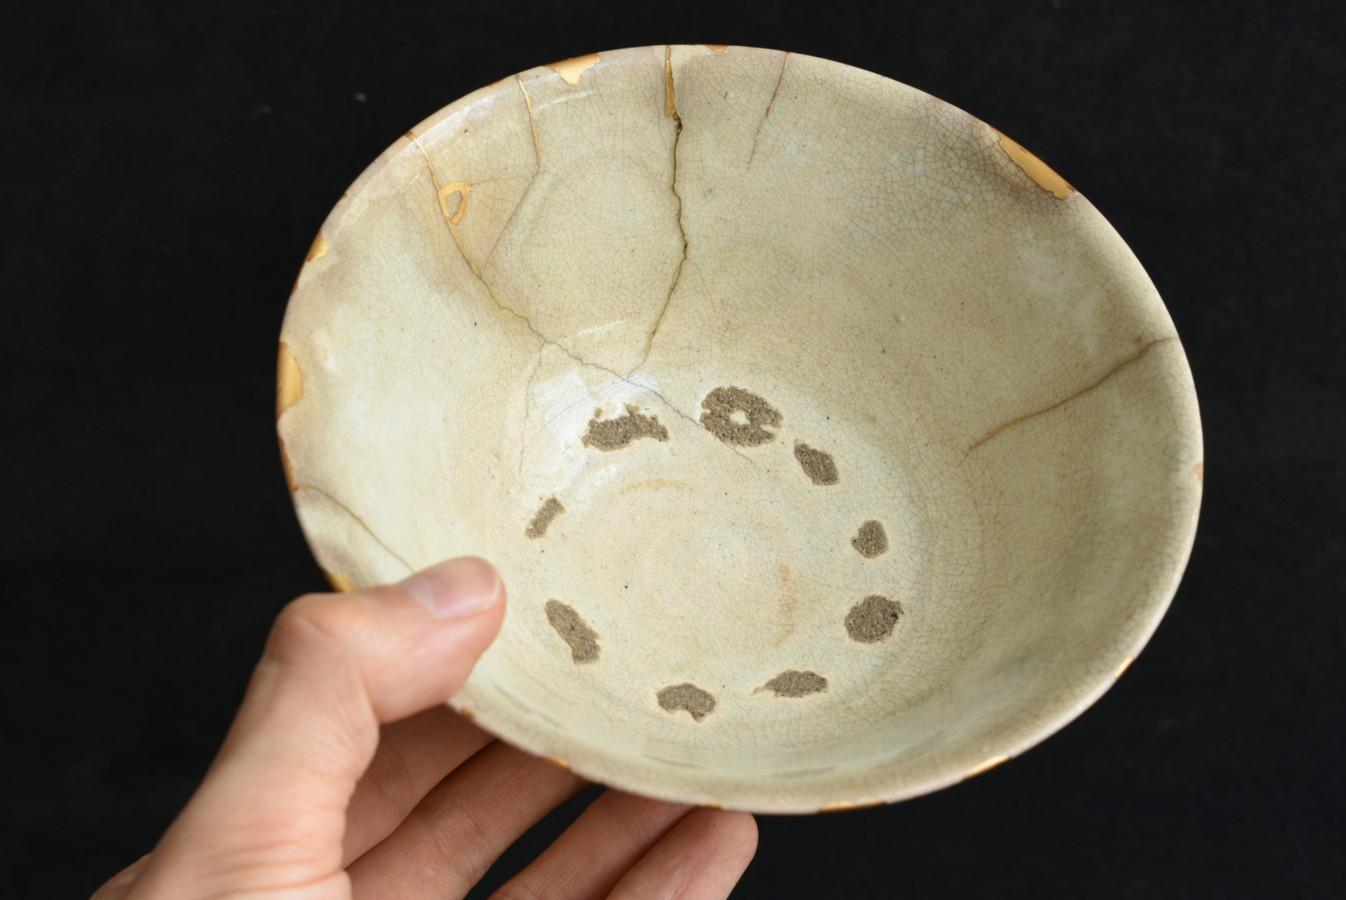 This is a white porcelain bowl made in Korea around the 16th century.
This period is known as the Joseon Dynasty (15th-19th centuries).
The 16th century corresponds to the first half.

This tea bowl was made in Gyeongsangnam-do (near Busan) in the